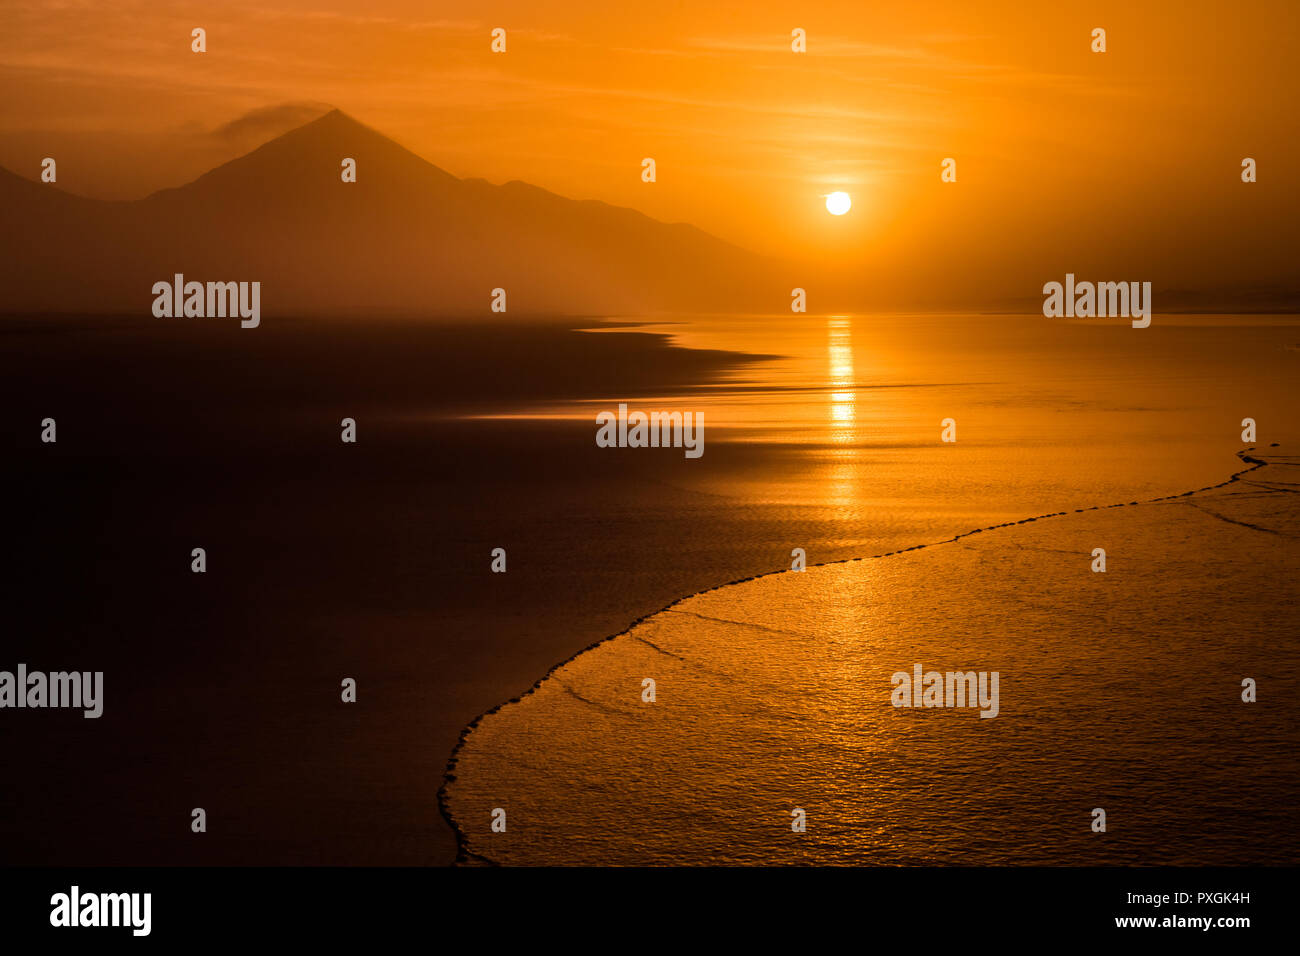 Sunset tropical Cofete beach landscape with silhouette of hills in Fuerteventura, Canary Islands, Spain. Stock Photo